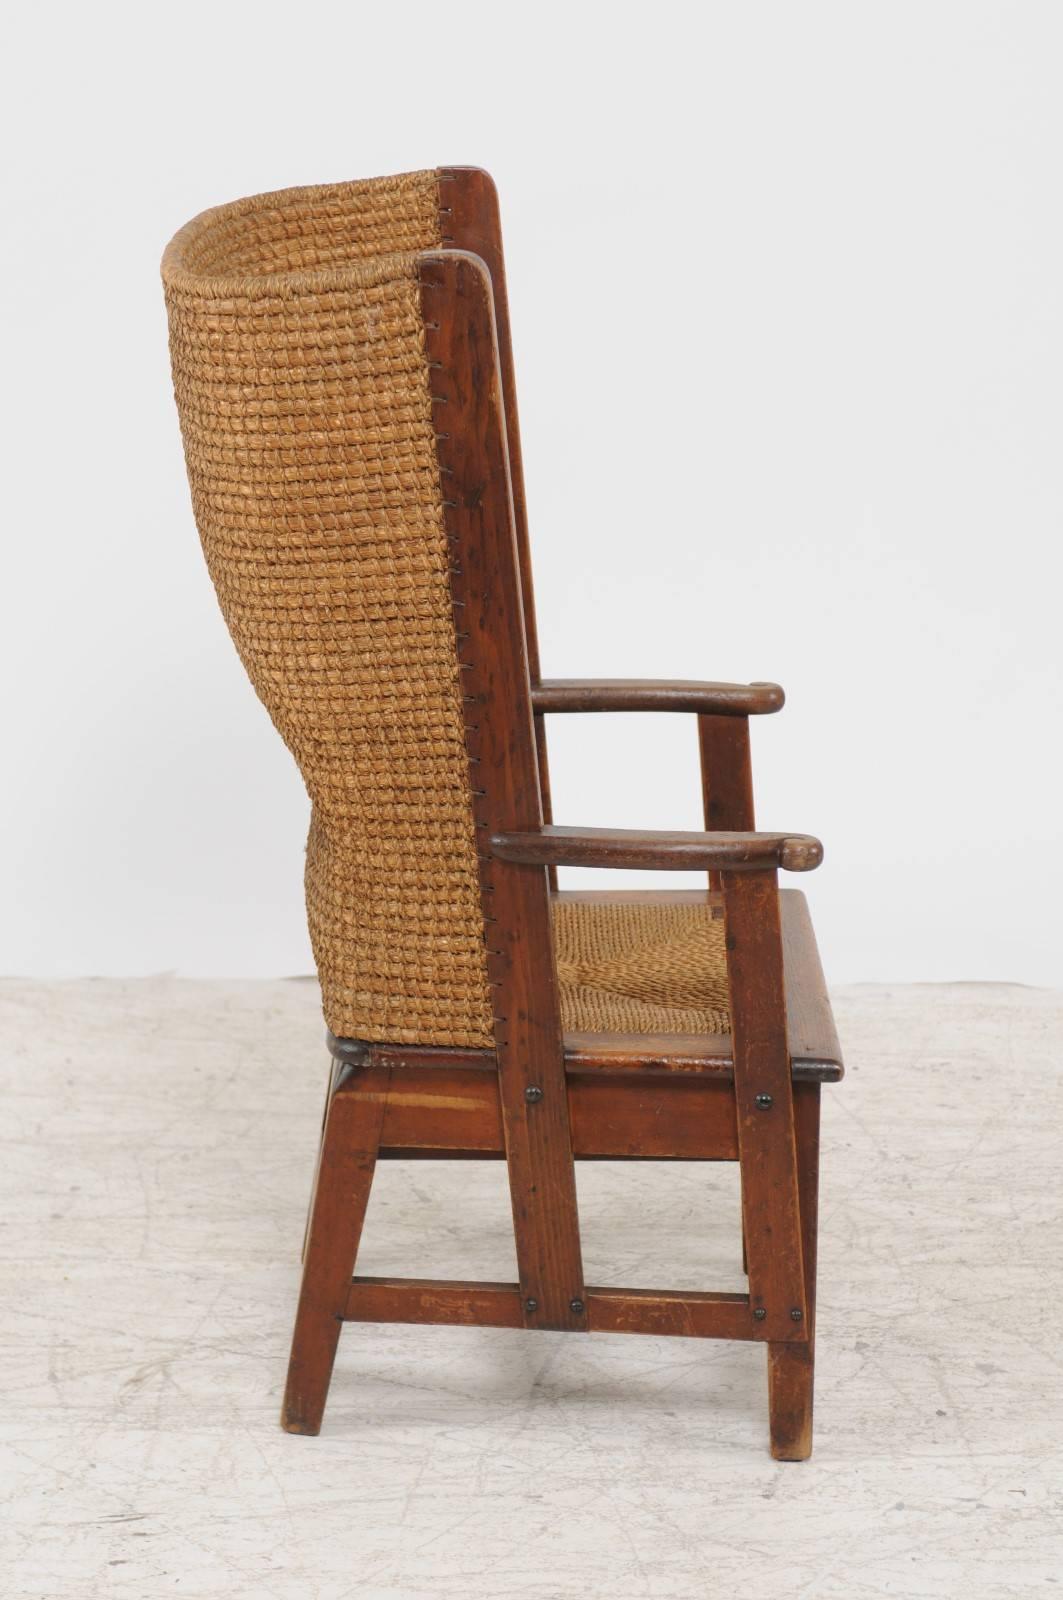 Scottish Late 19th Century Orkney Chair with Wraparound Handwoven Straw Back 3